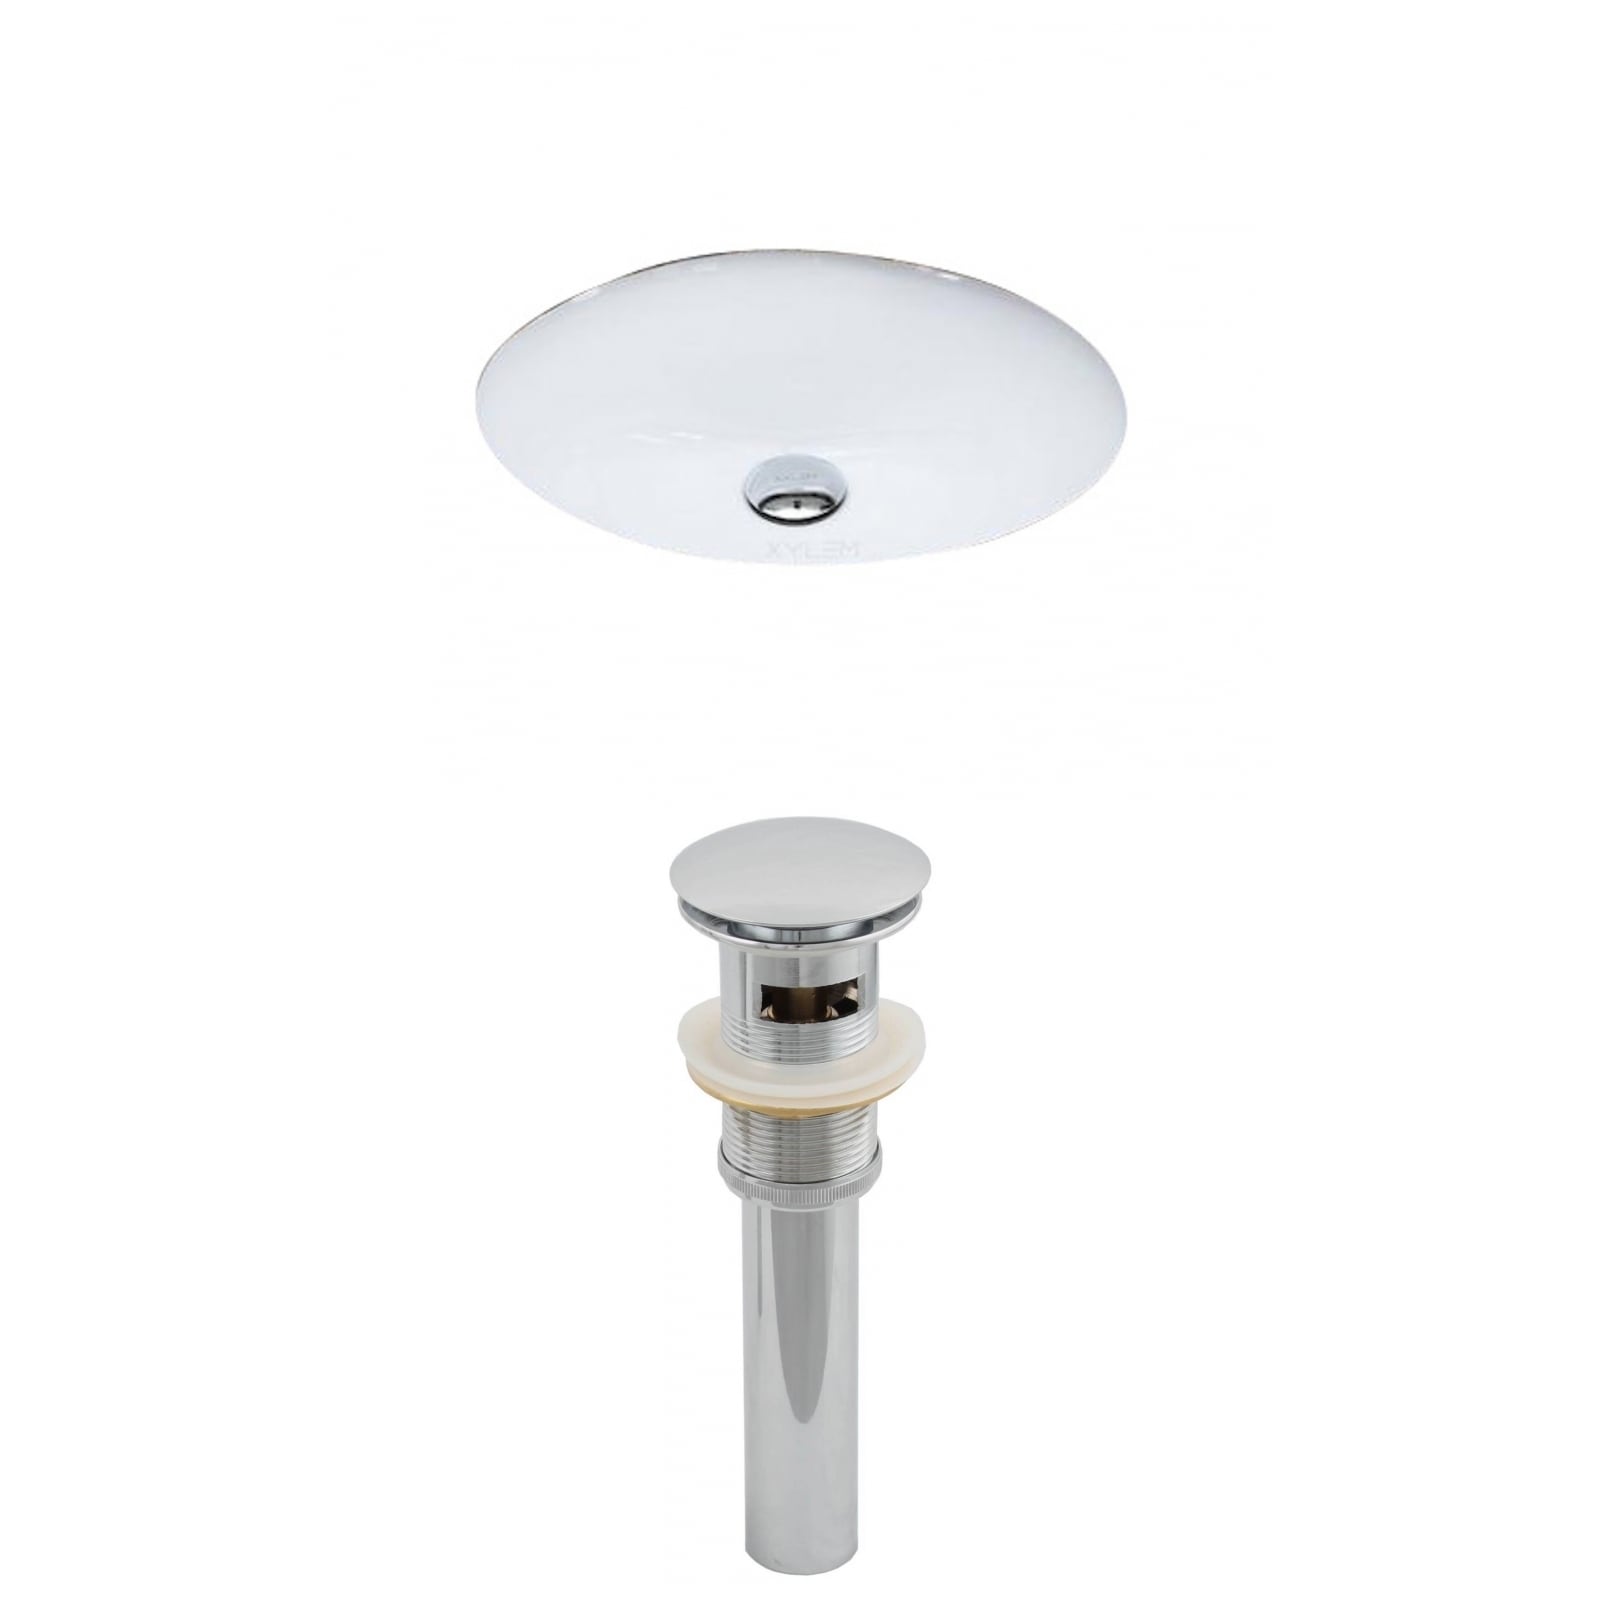 19.5-in. W x 16.25-in. D Oval Undermount Sink Set In White And Drain